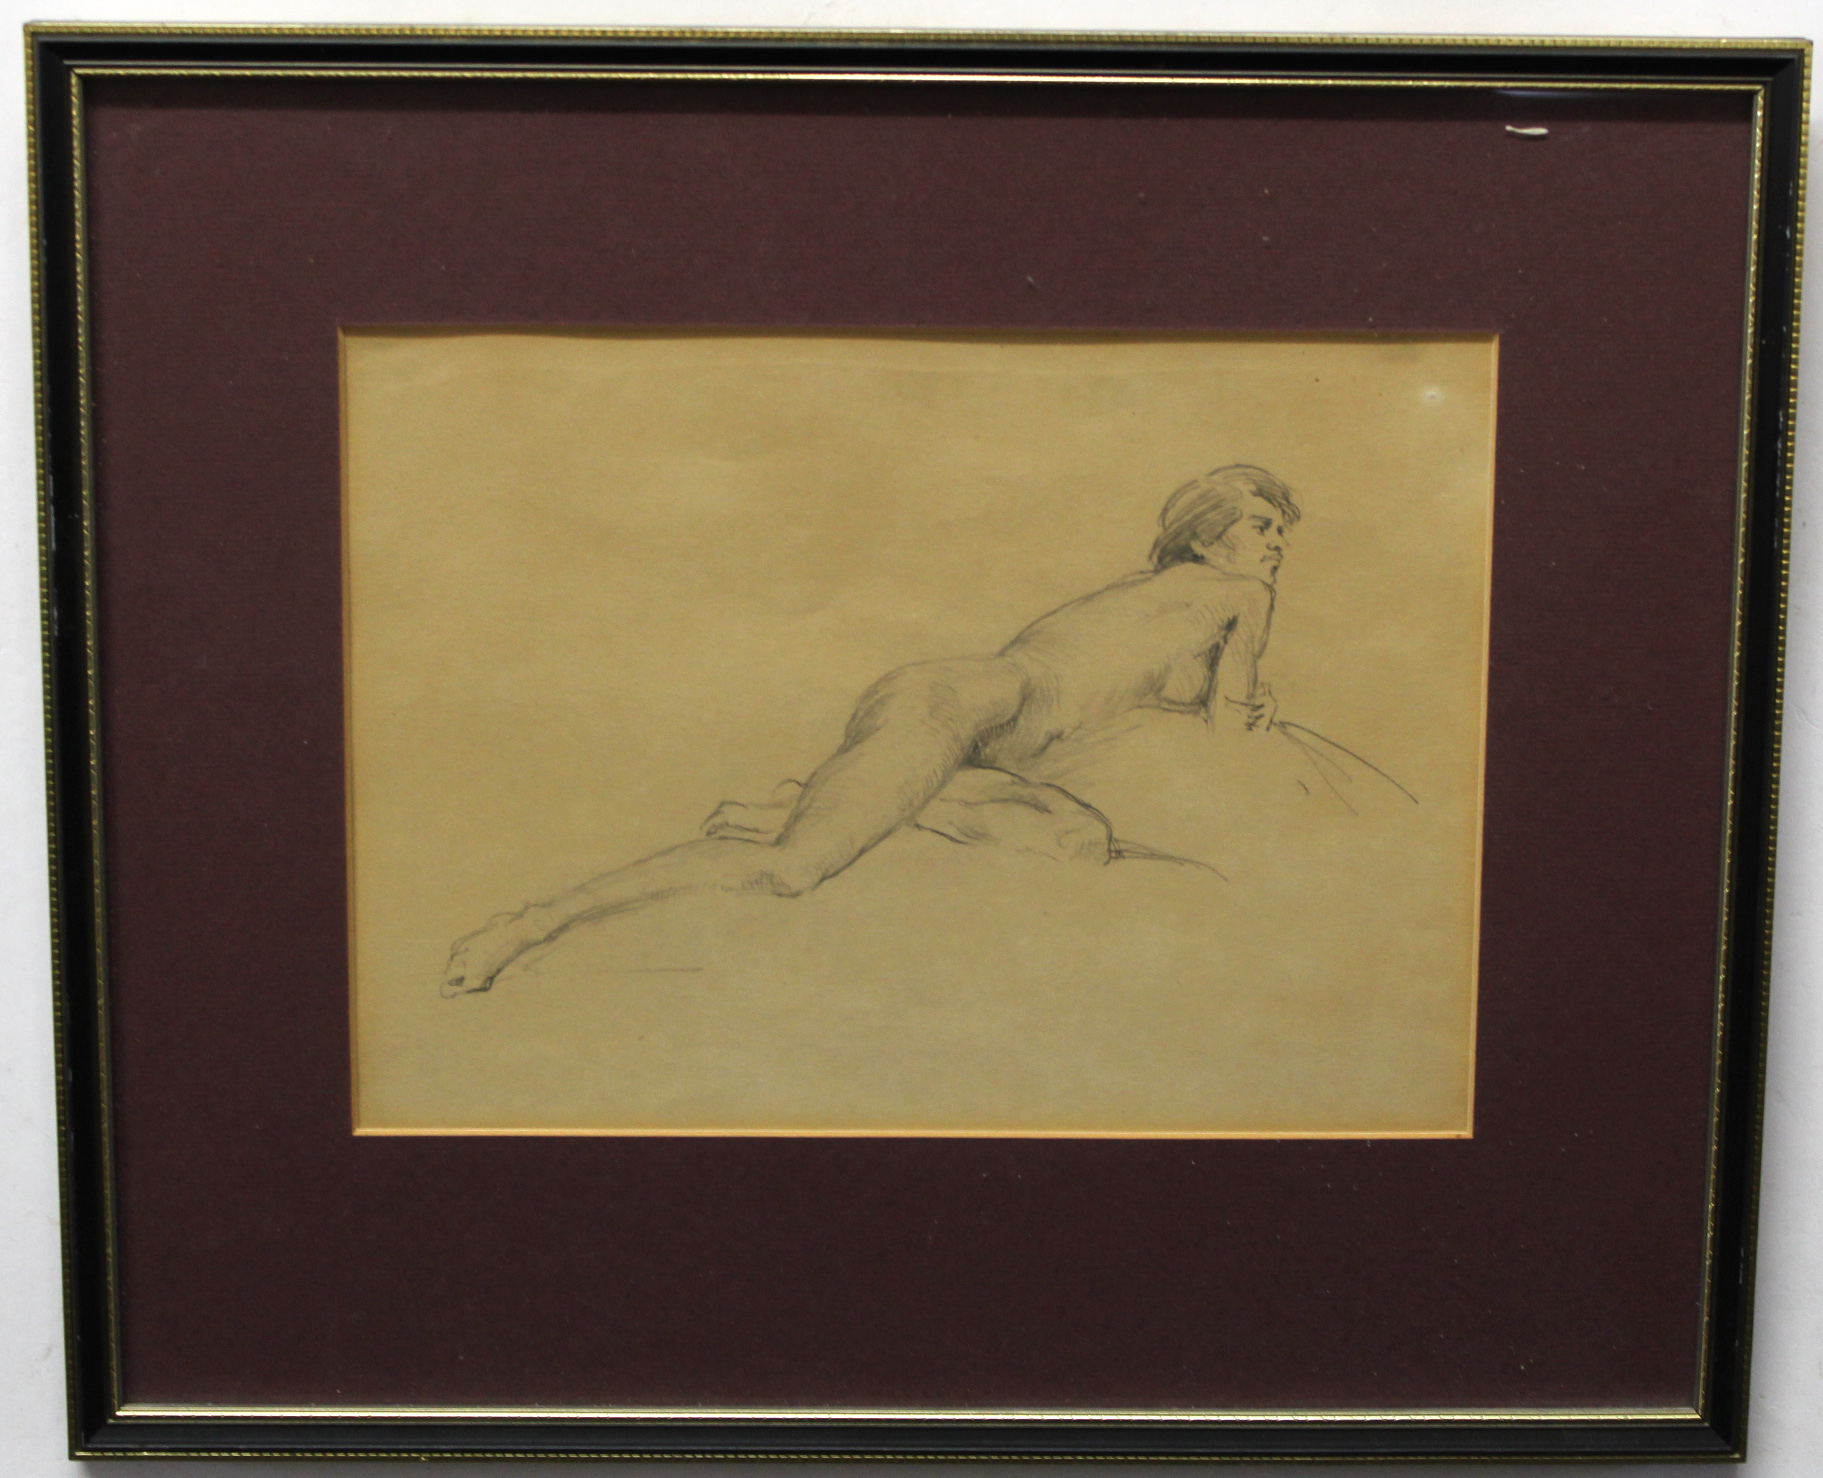 Attributed to Gerald Ackermann, pencil drawing, Nude, 19 x 26cm